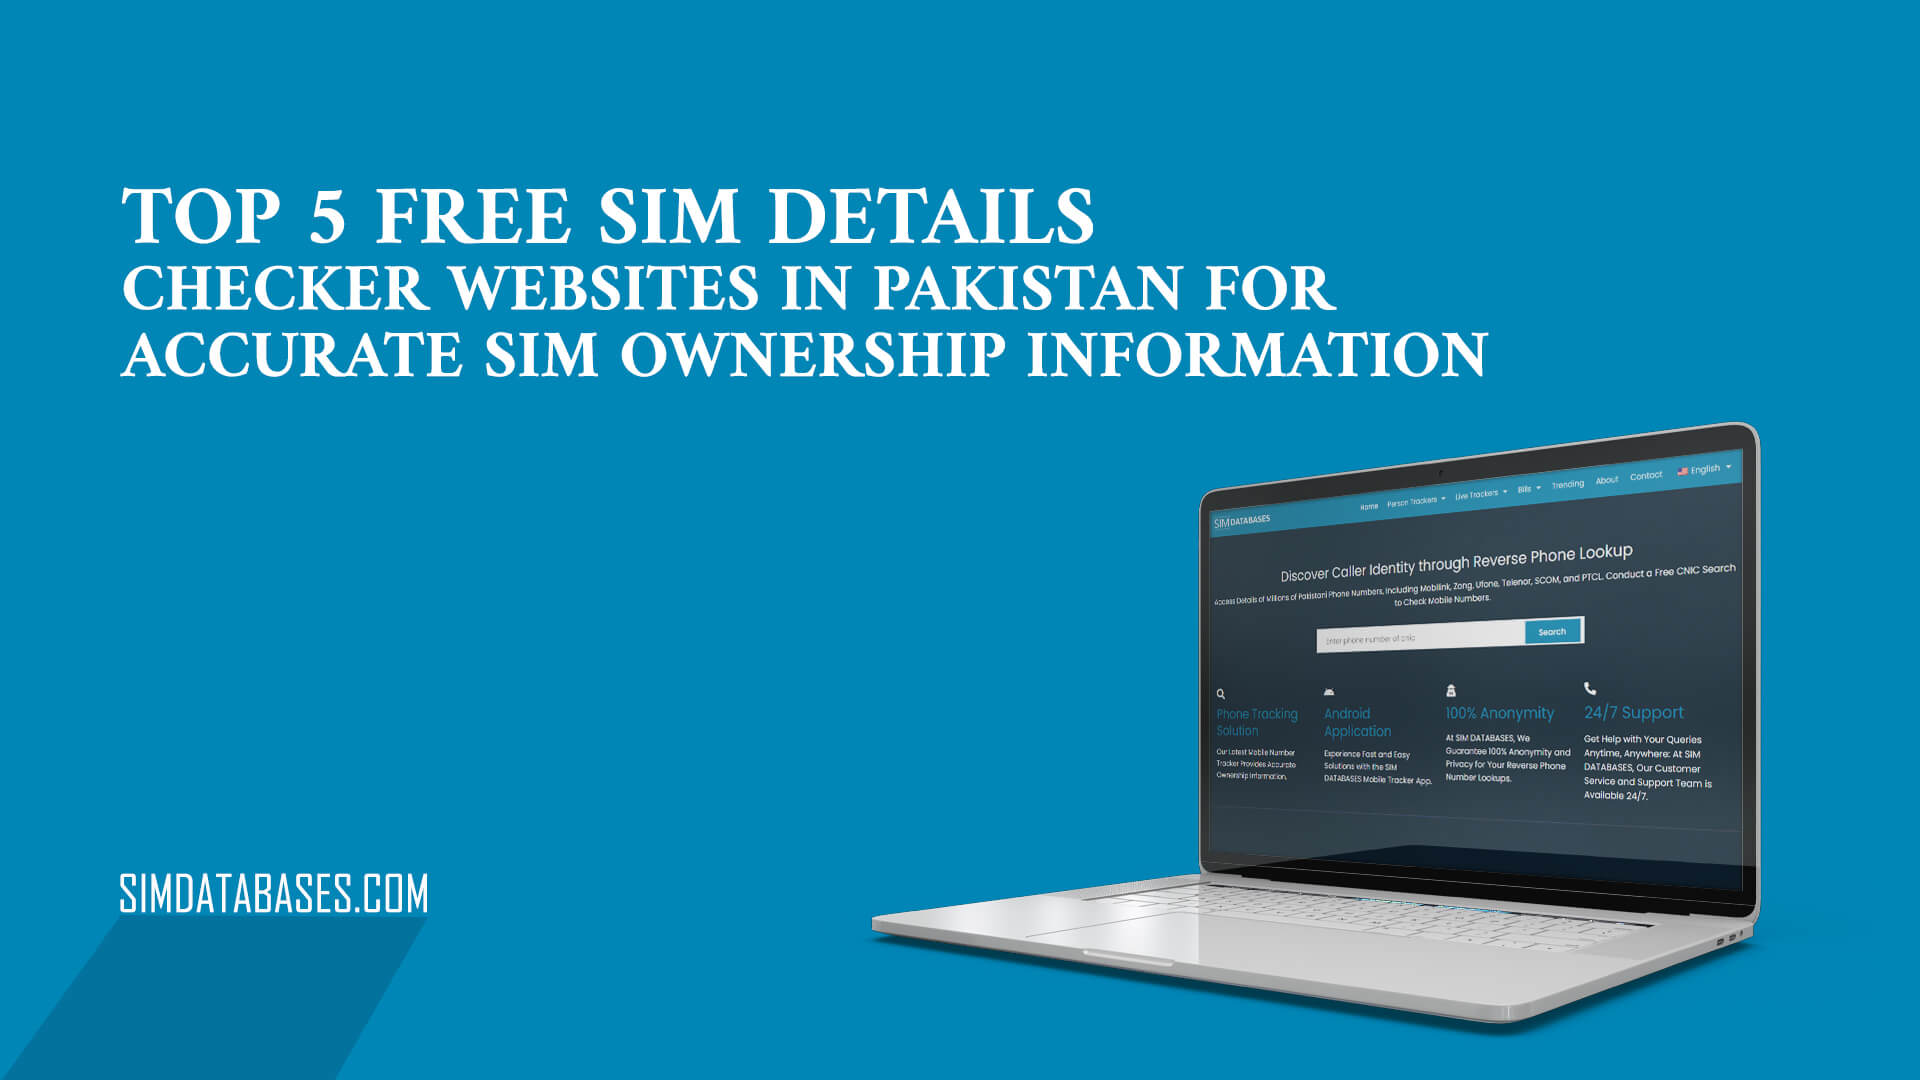 Top 5 Free SIM Details Checker Websites in Pakistan for Accurate SIM Ownership Information